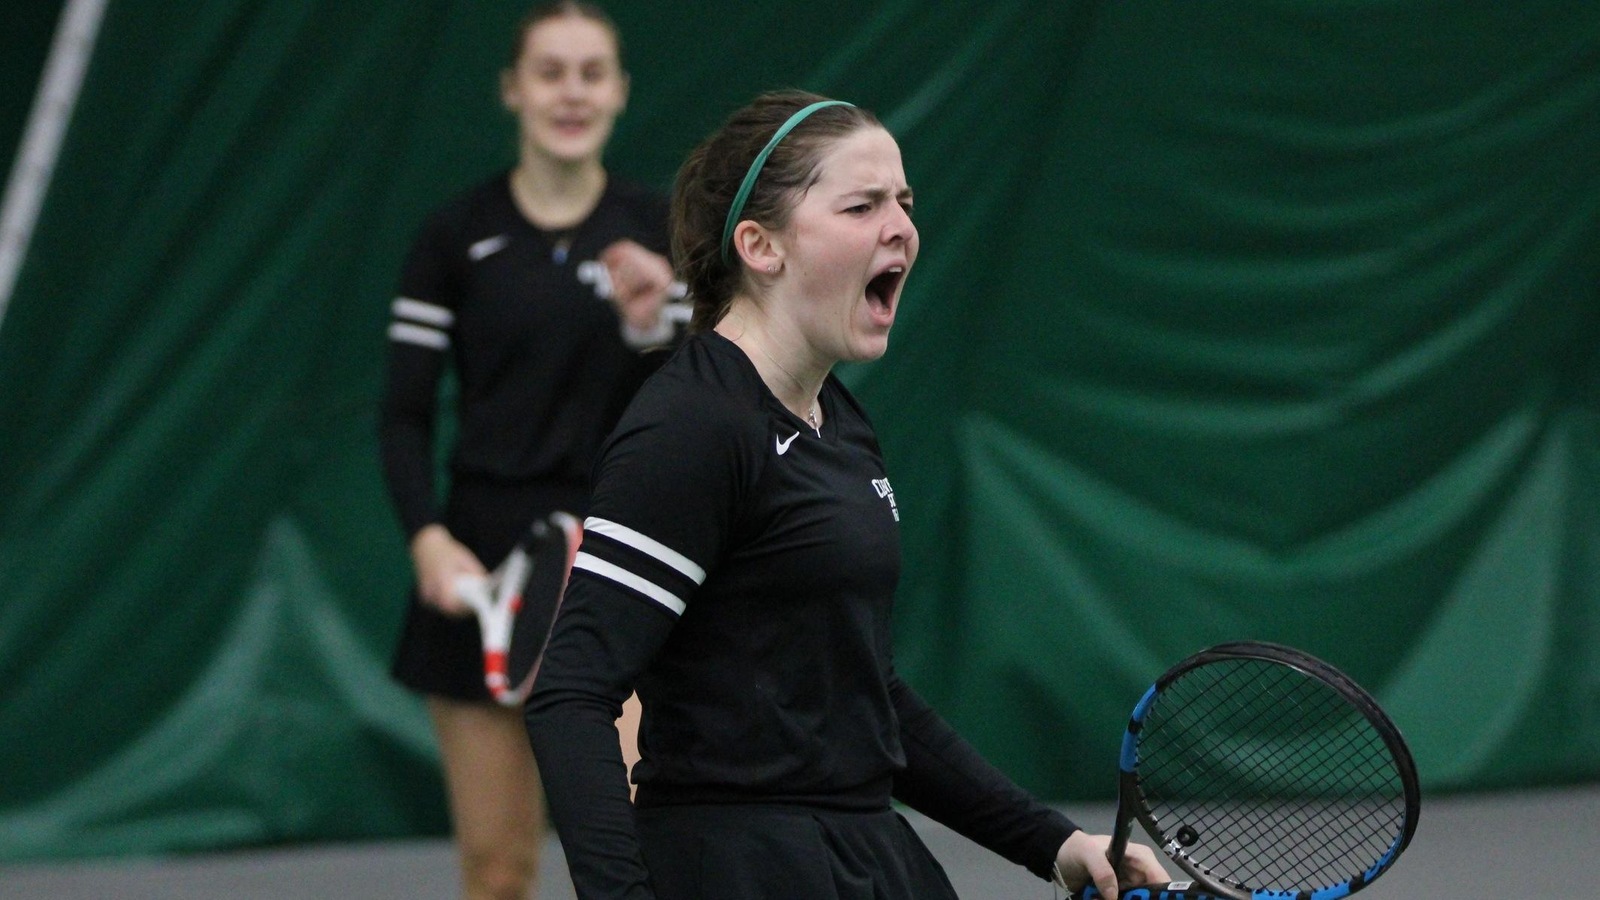 Cleveland State Women's Tennis Sweeps #HLTennis Weekly Awards